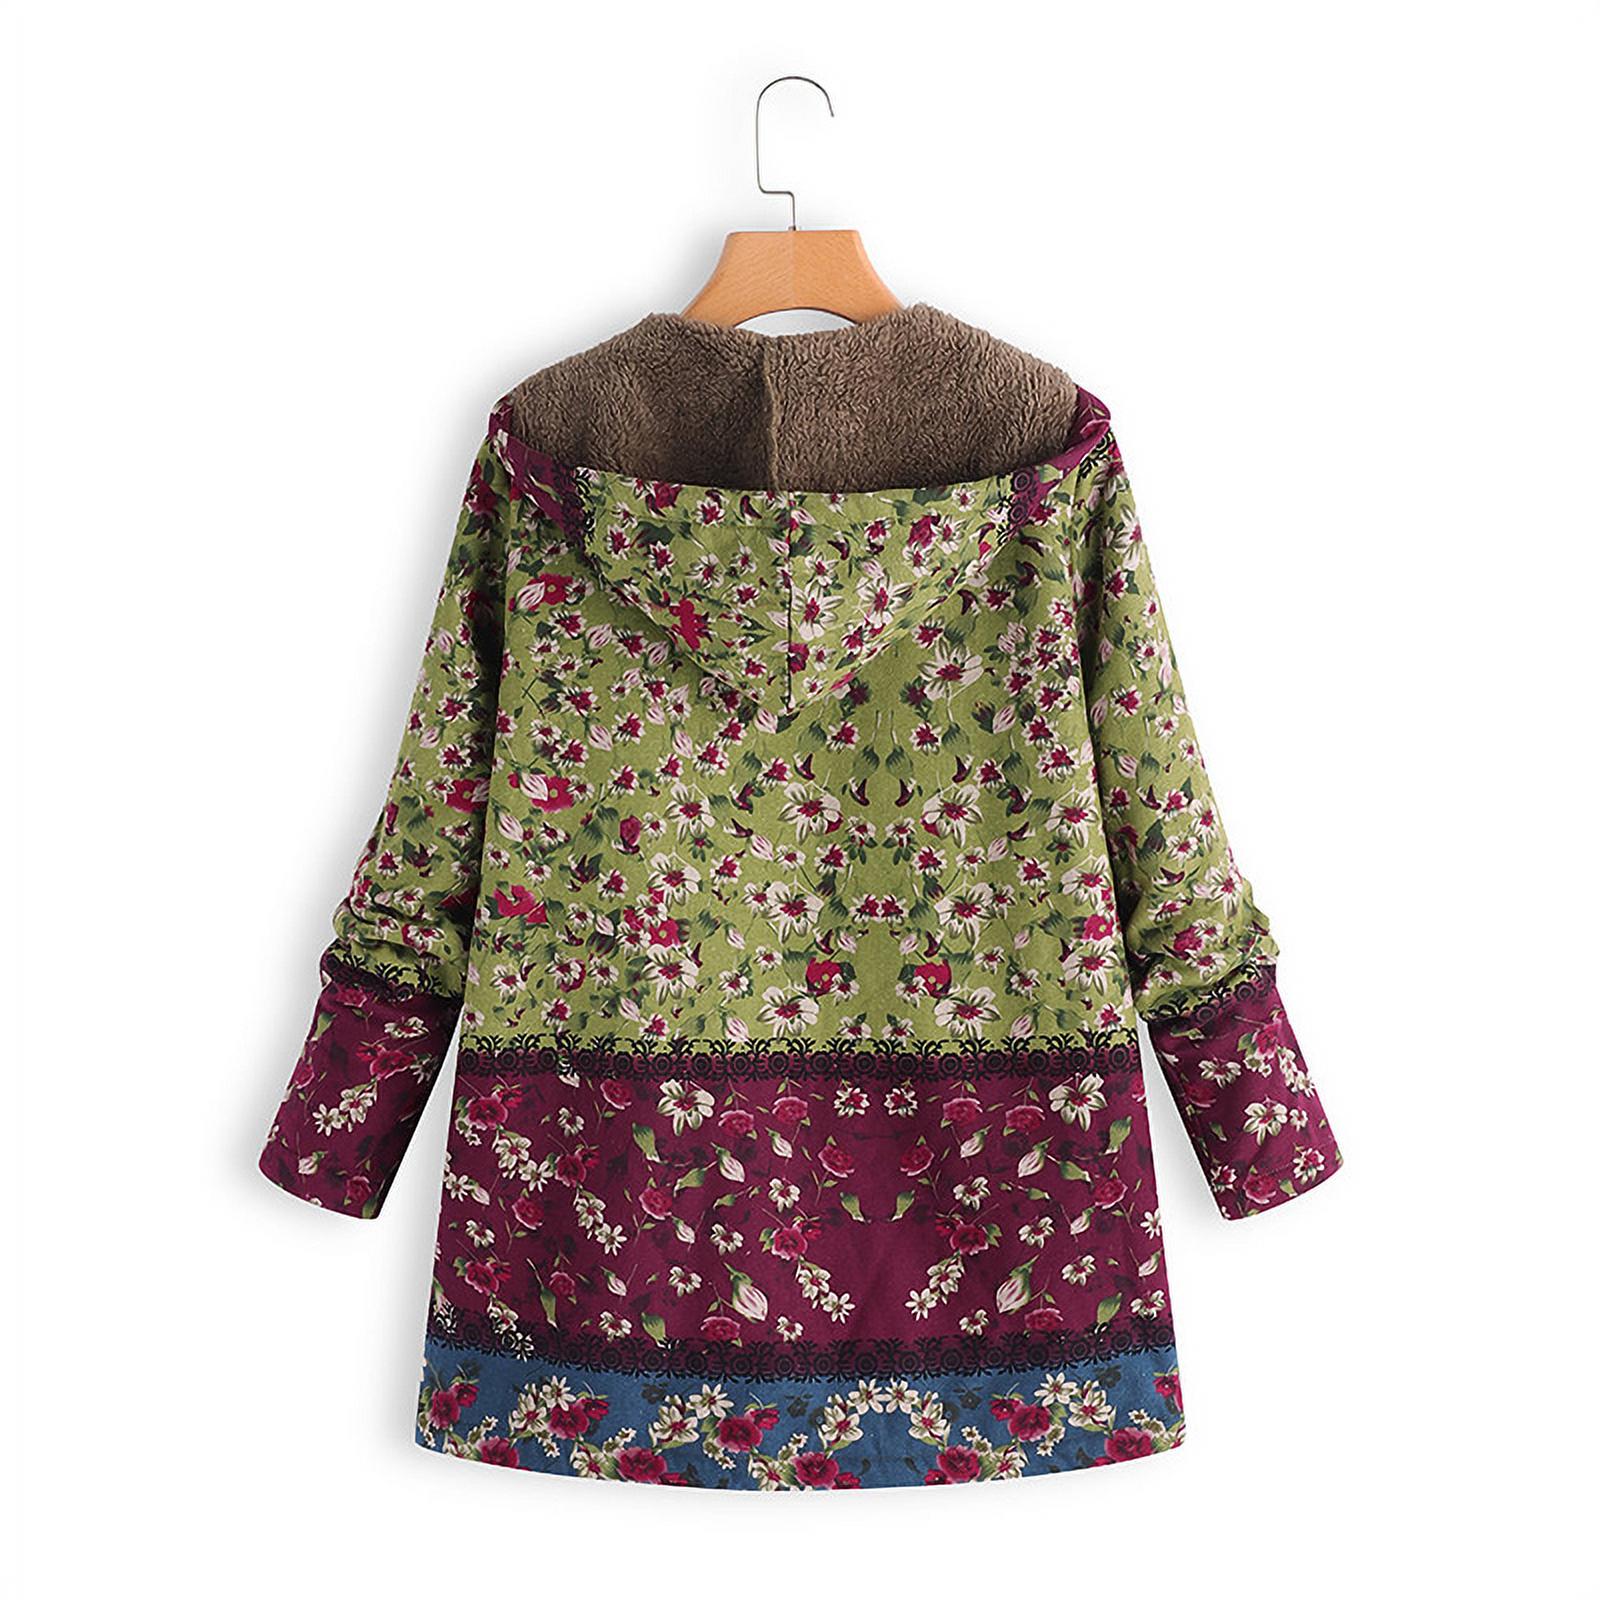 Women Winter Coat Floral Printed Hooded with Pockets Warm Fleece Button Coat Long Sleeve Jacket - image 5 of 8